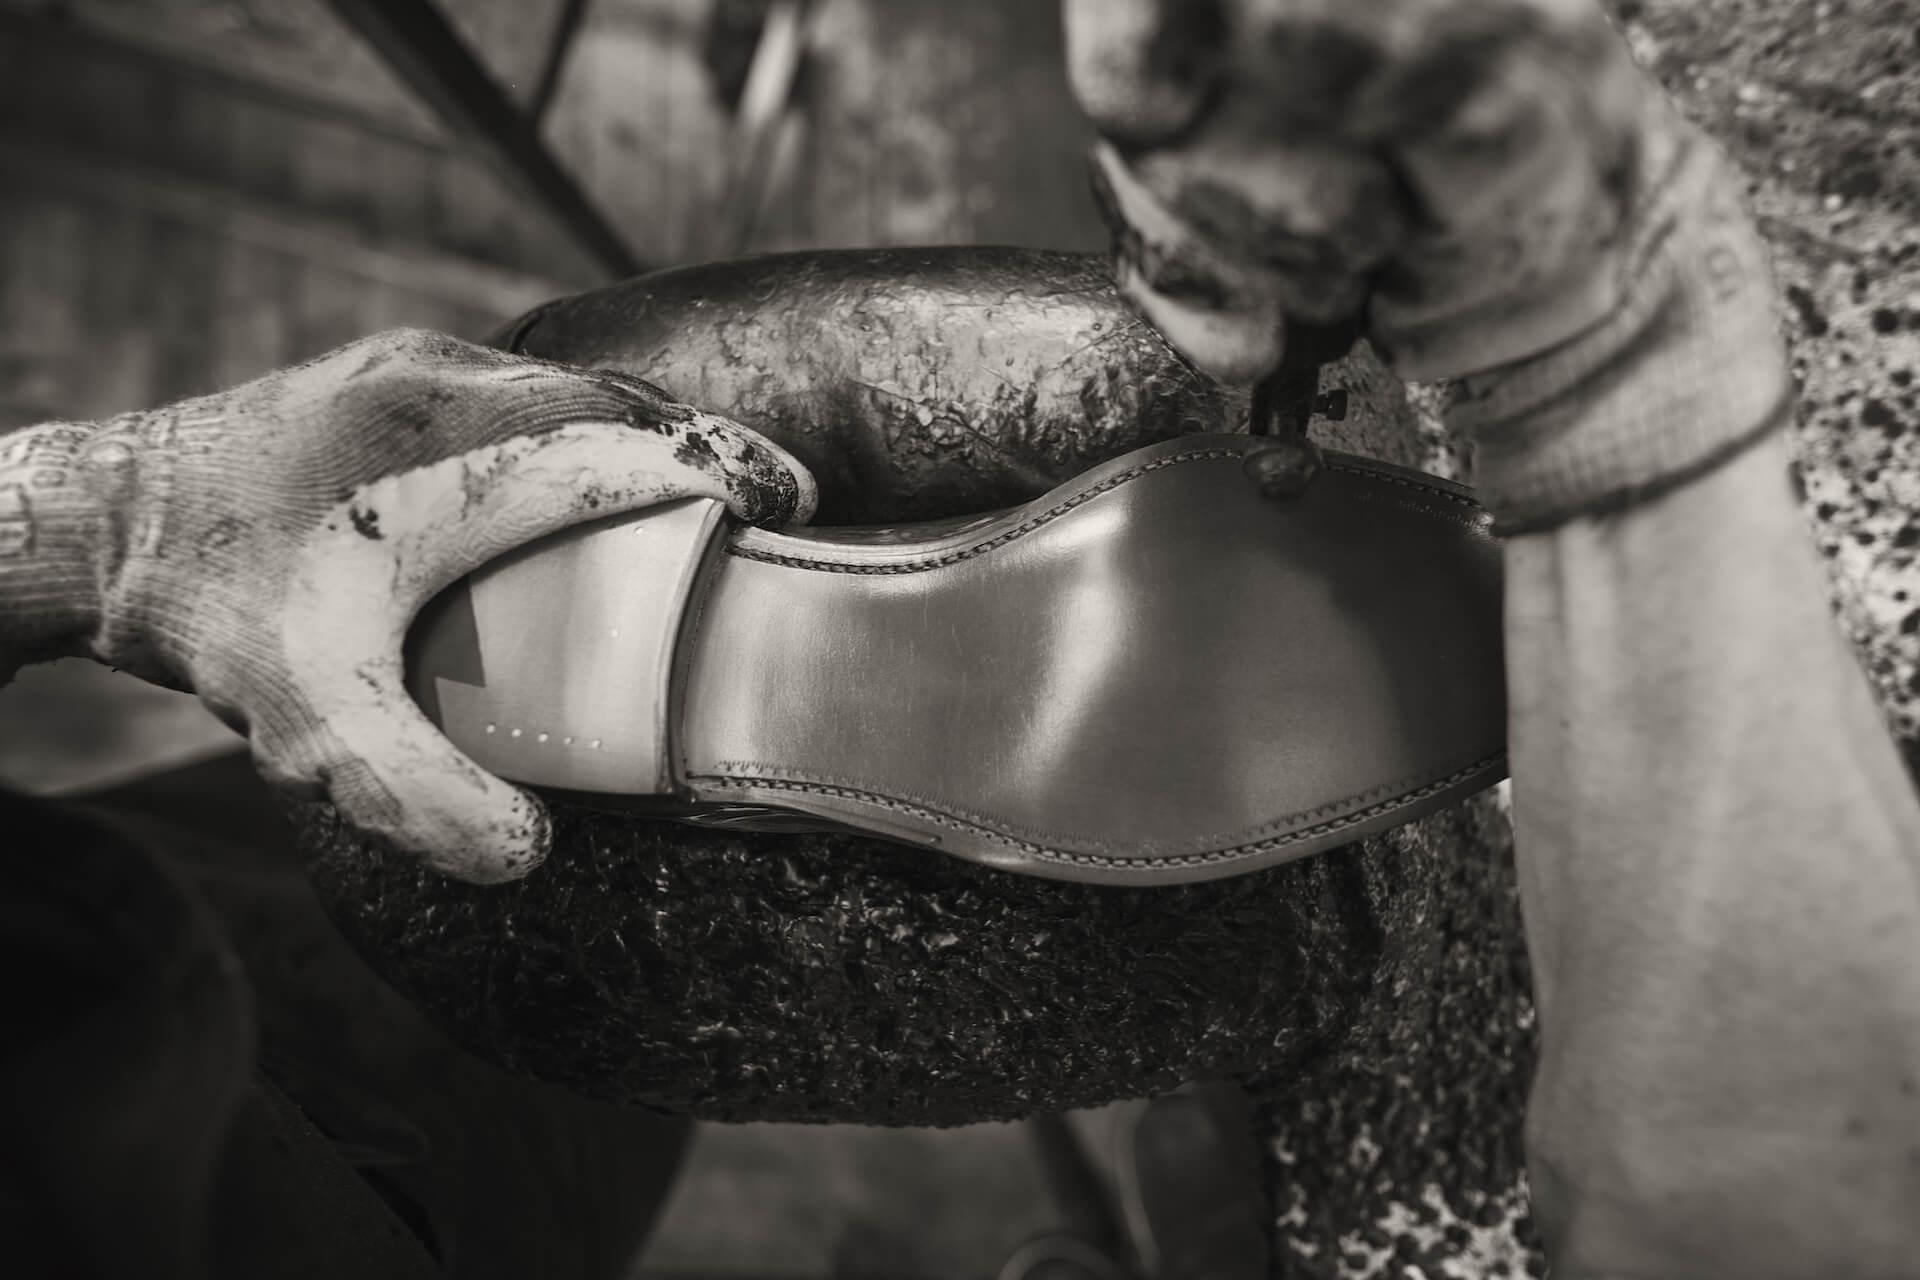 Sole of a leather shoe being worked on